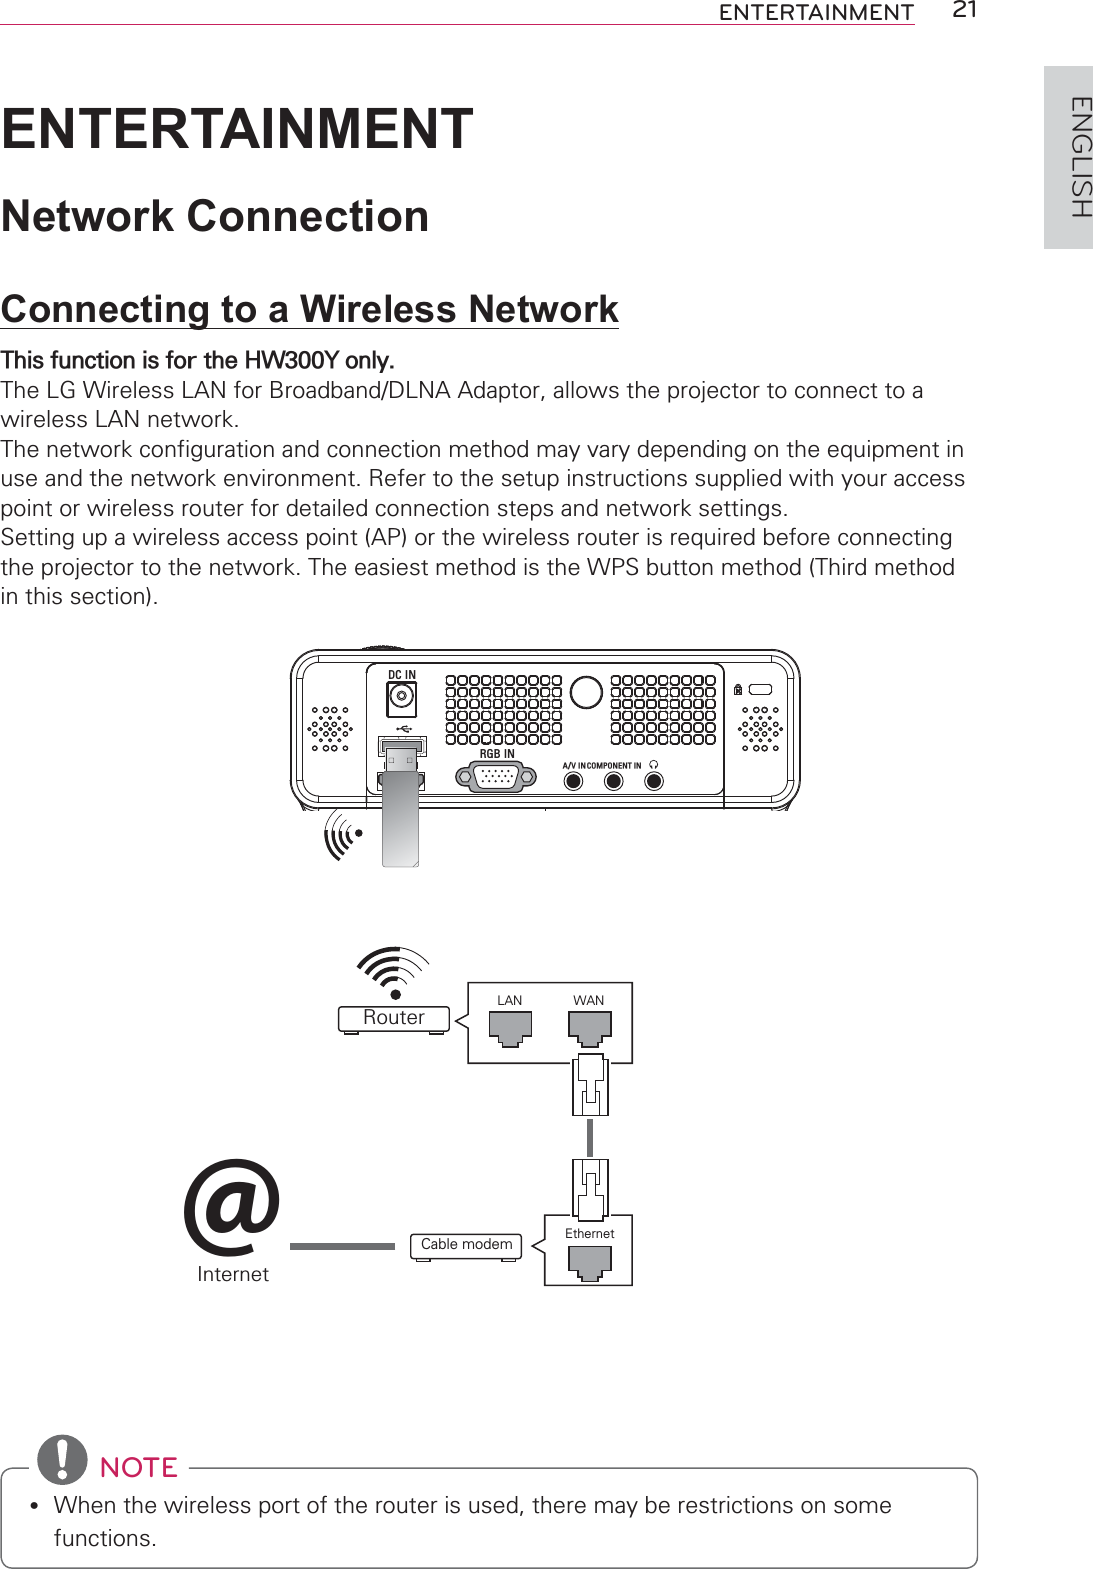 21ENTERTAINMENTENGLISHENTERTAINMENTNetwork ConnectionConnecting to a Wireless NetworkThis function is for the HW300Y only.The LG Wireless LAN for Broadband/DLNA Adaptor, allows the projector to connect to a wireless LAN network. The network configuration and connection method may vary depending on the equipment in use and the network environment. Refer to the setup instructions supplied with your access point or wireless router for detailed connection steps and network settings.Setting up a wireless access point (AP) or the wireless router is required before connecting the projector to the network. The easiest method is the WPS button method (Third method in this section). LAN WANEthernet@RouterInternetCable modem&apos;&amp;,15*%,1$9,1&amp;20321(17,1 NOTEy When the wireless port of the router is used, there may be restrictions on some functions.